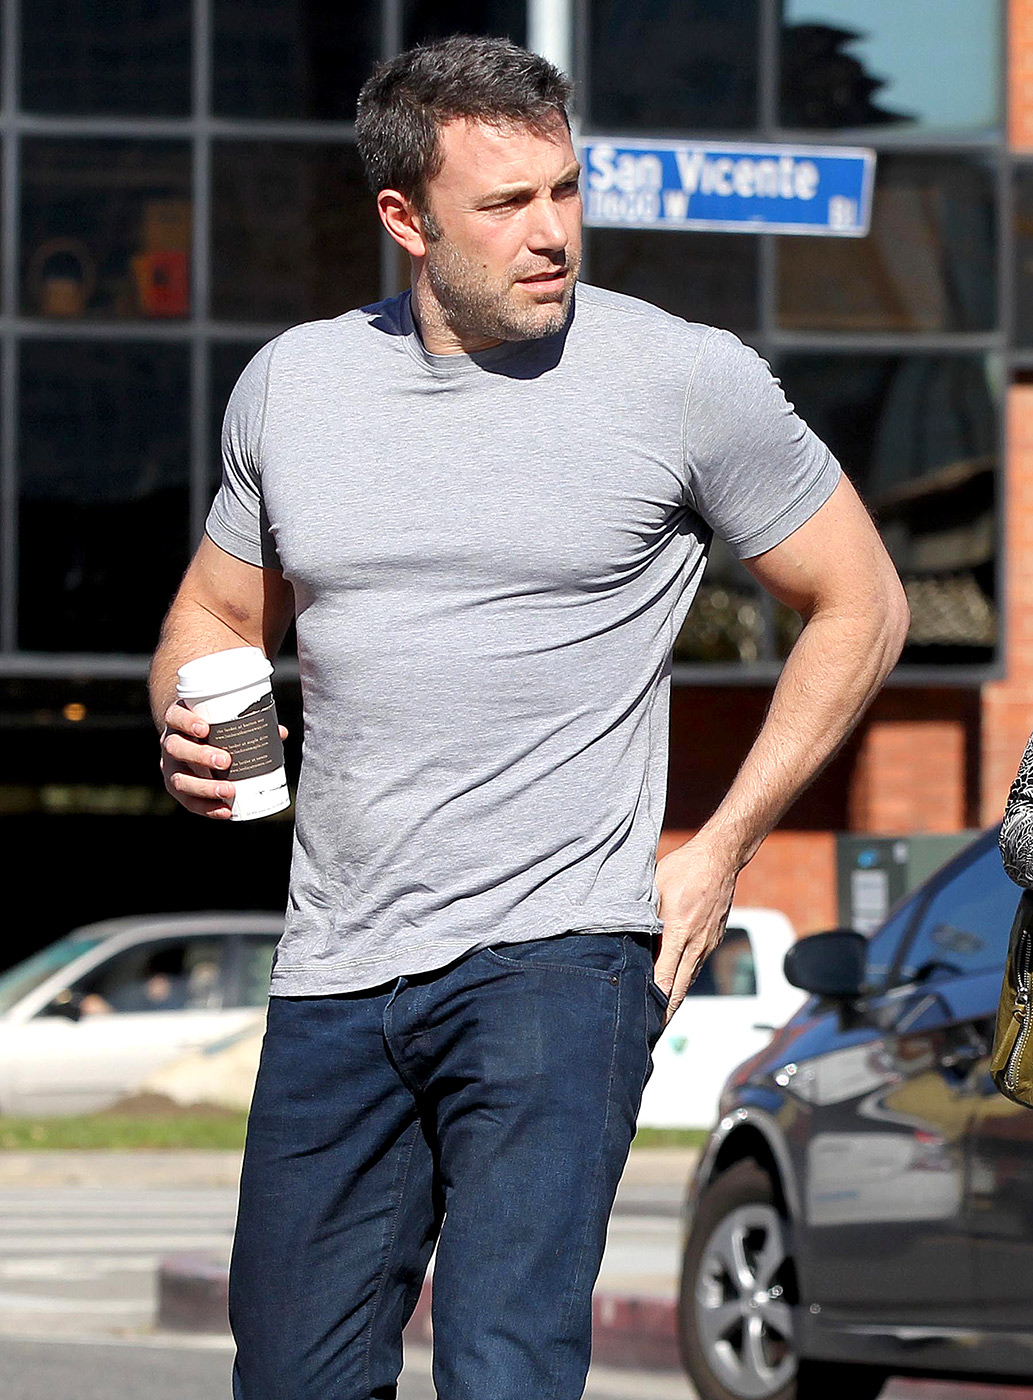 Ben Affleck Shows Off Huge Biceps in Tight TShirt, Looks Ripped Pics